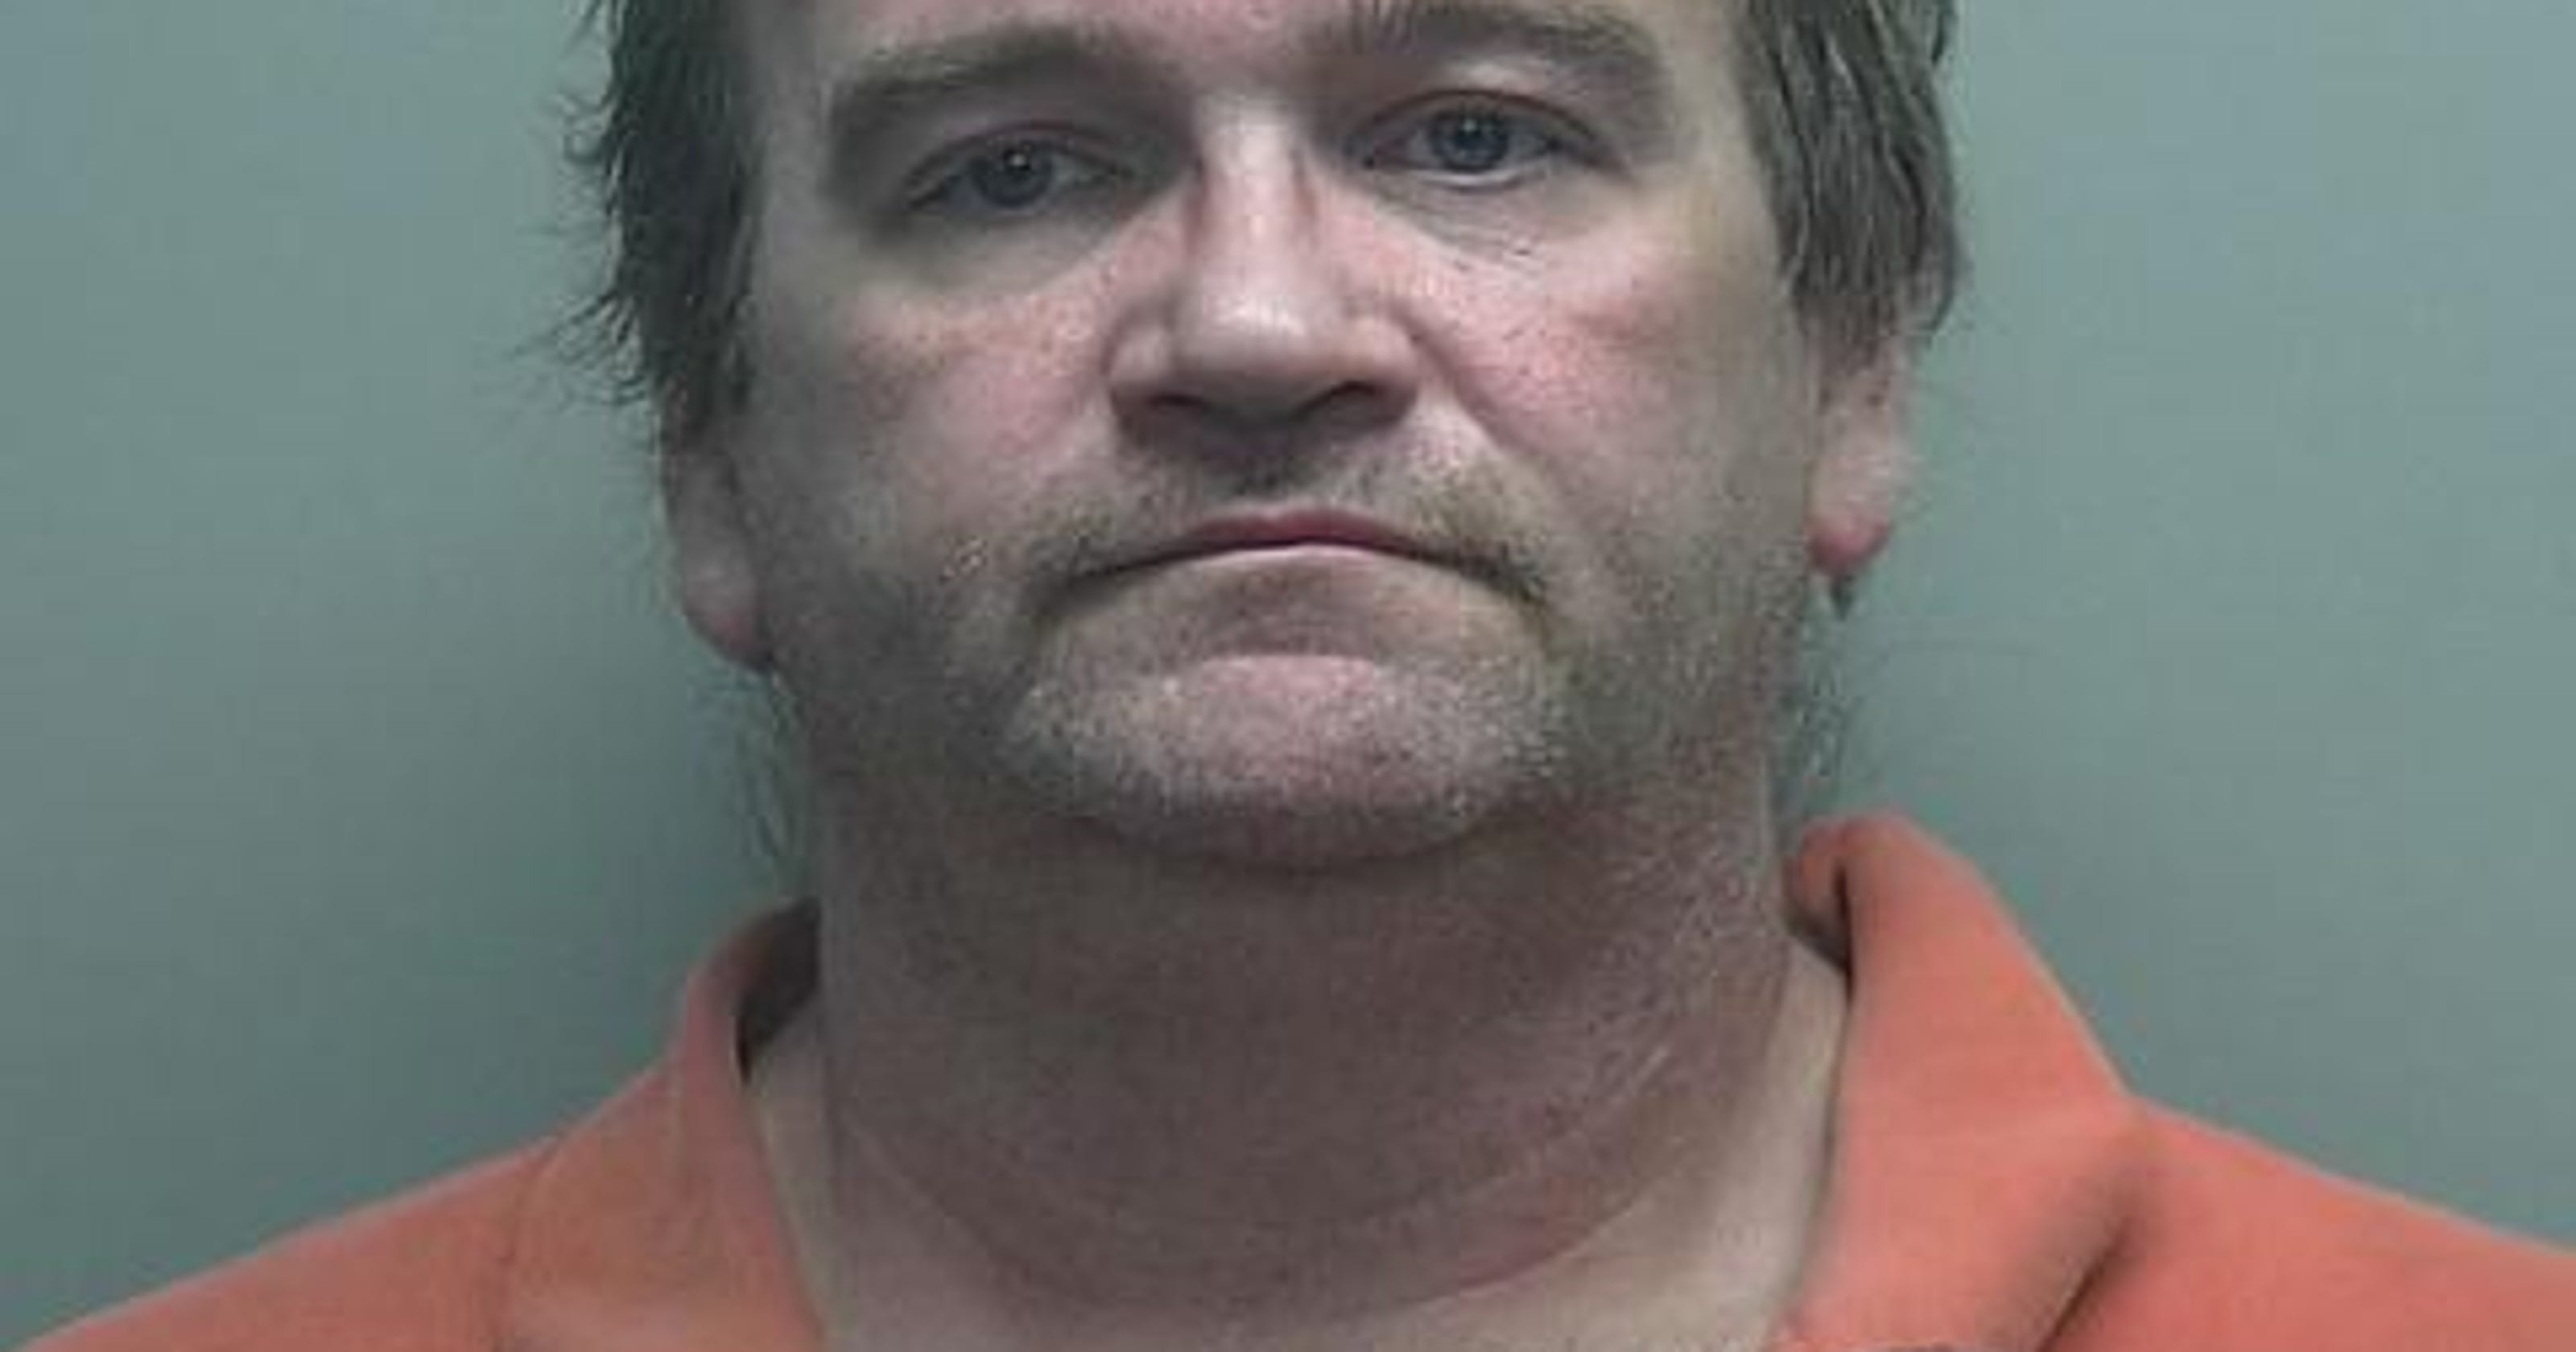 Sheboygan man charged with assaulting child